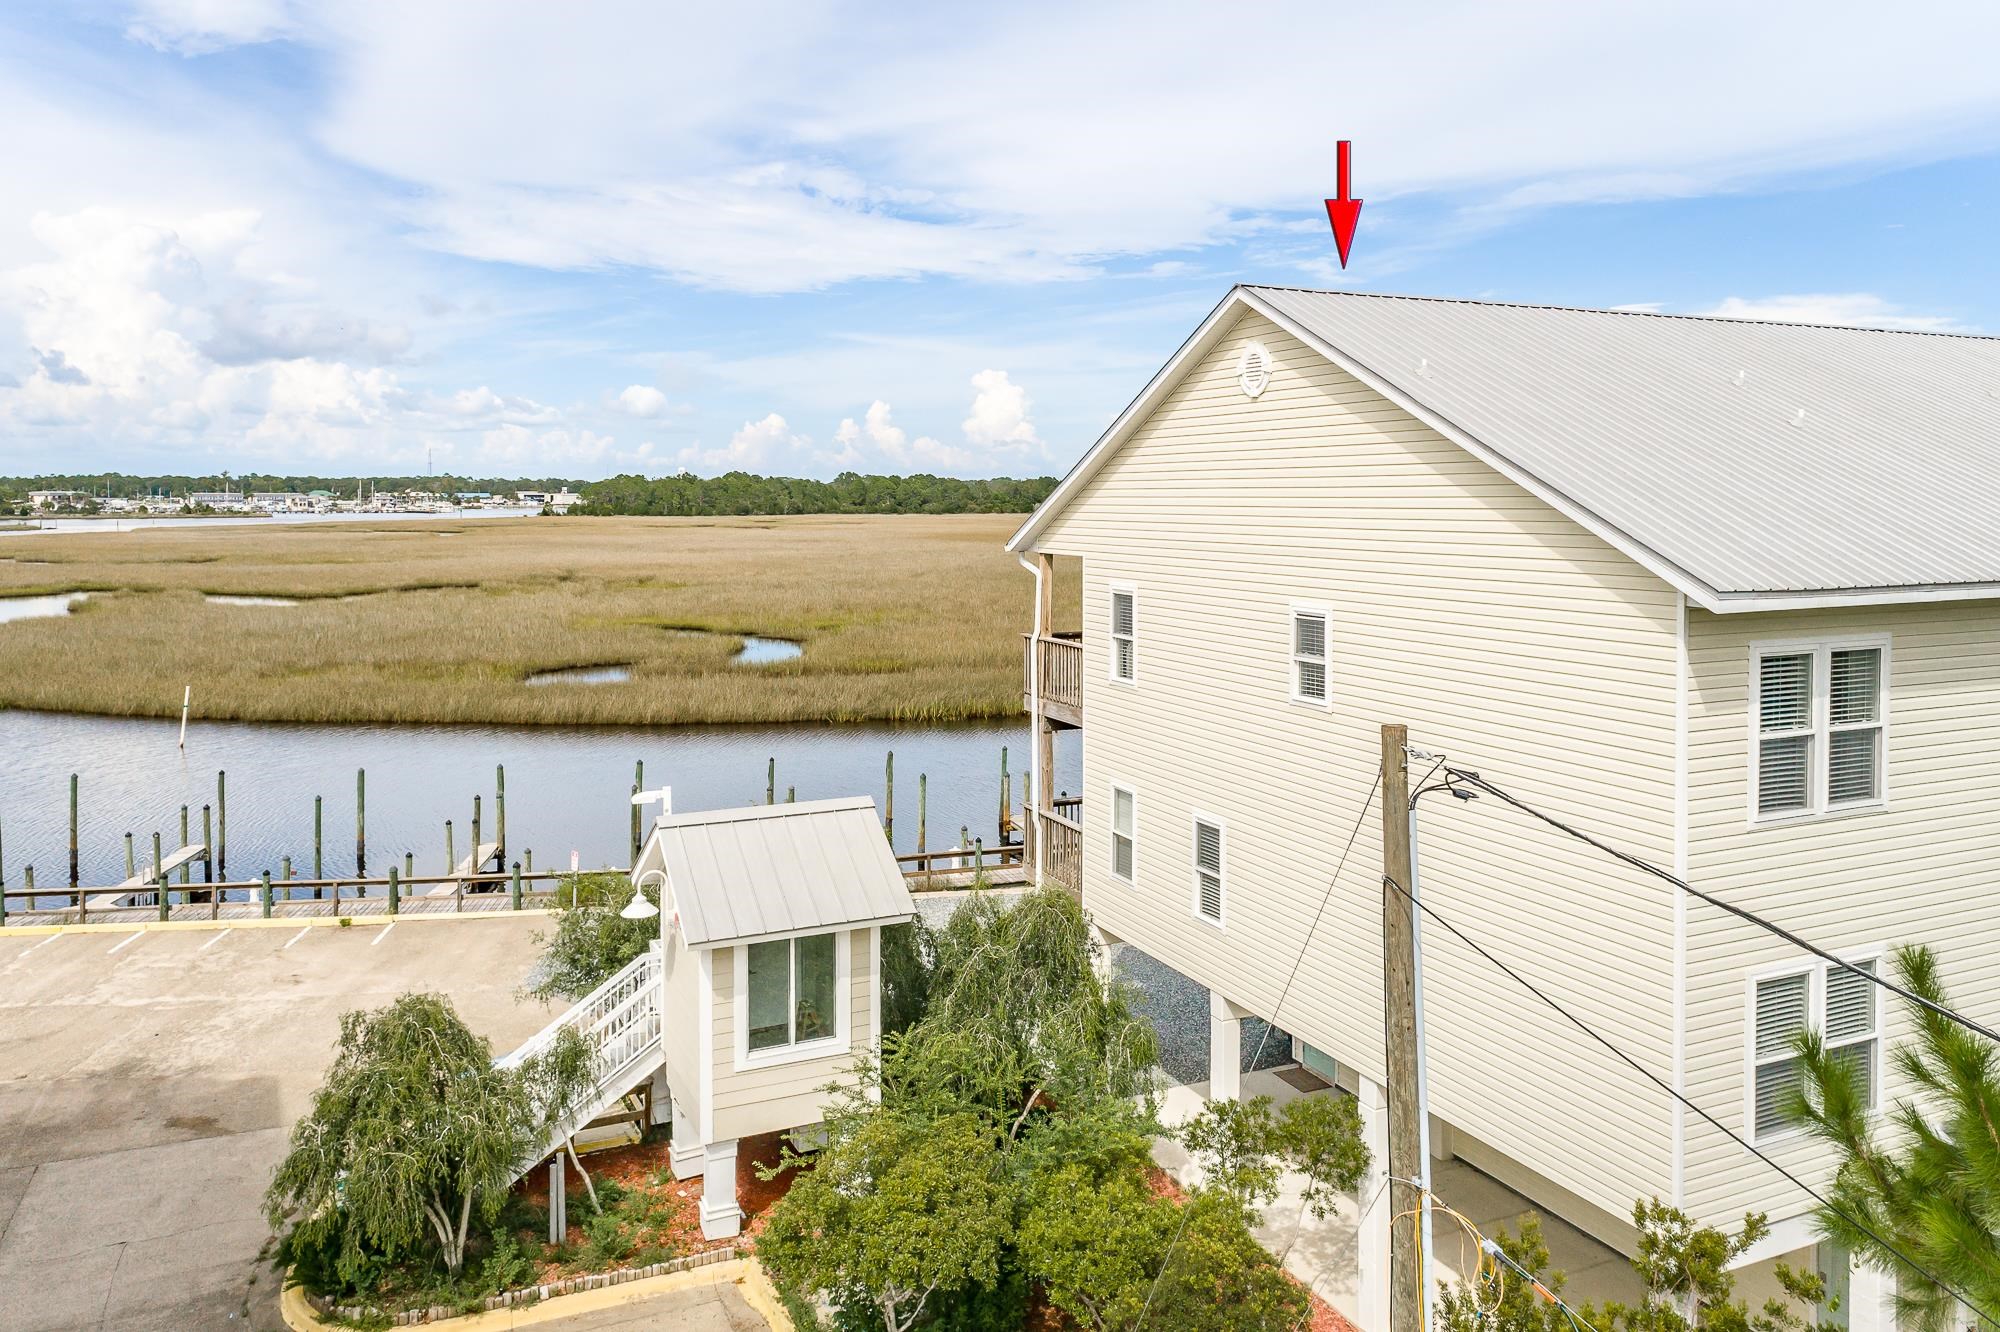 123 Timber Island Road,CARRABELLE,Florida 32322,2 Bedrooms Bedrooms,3 BathroomsBathrooms,Townhouse,123 Timber Island Road,363167